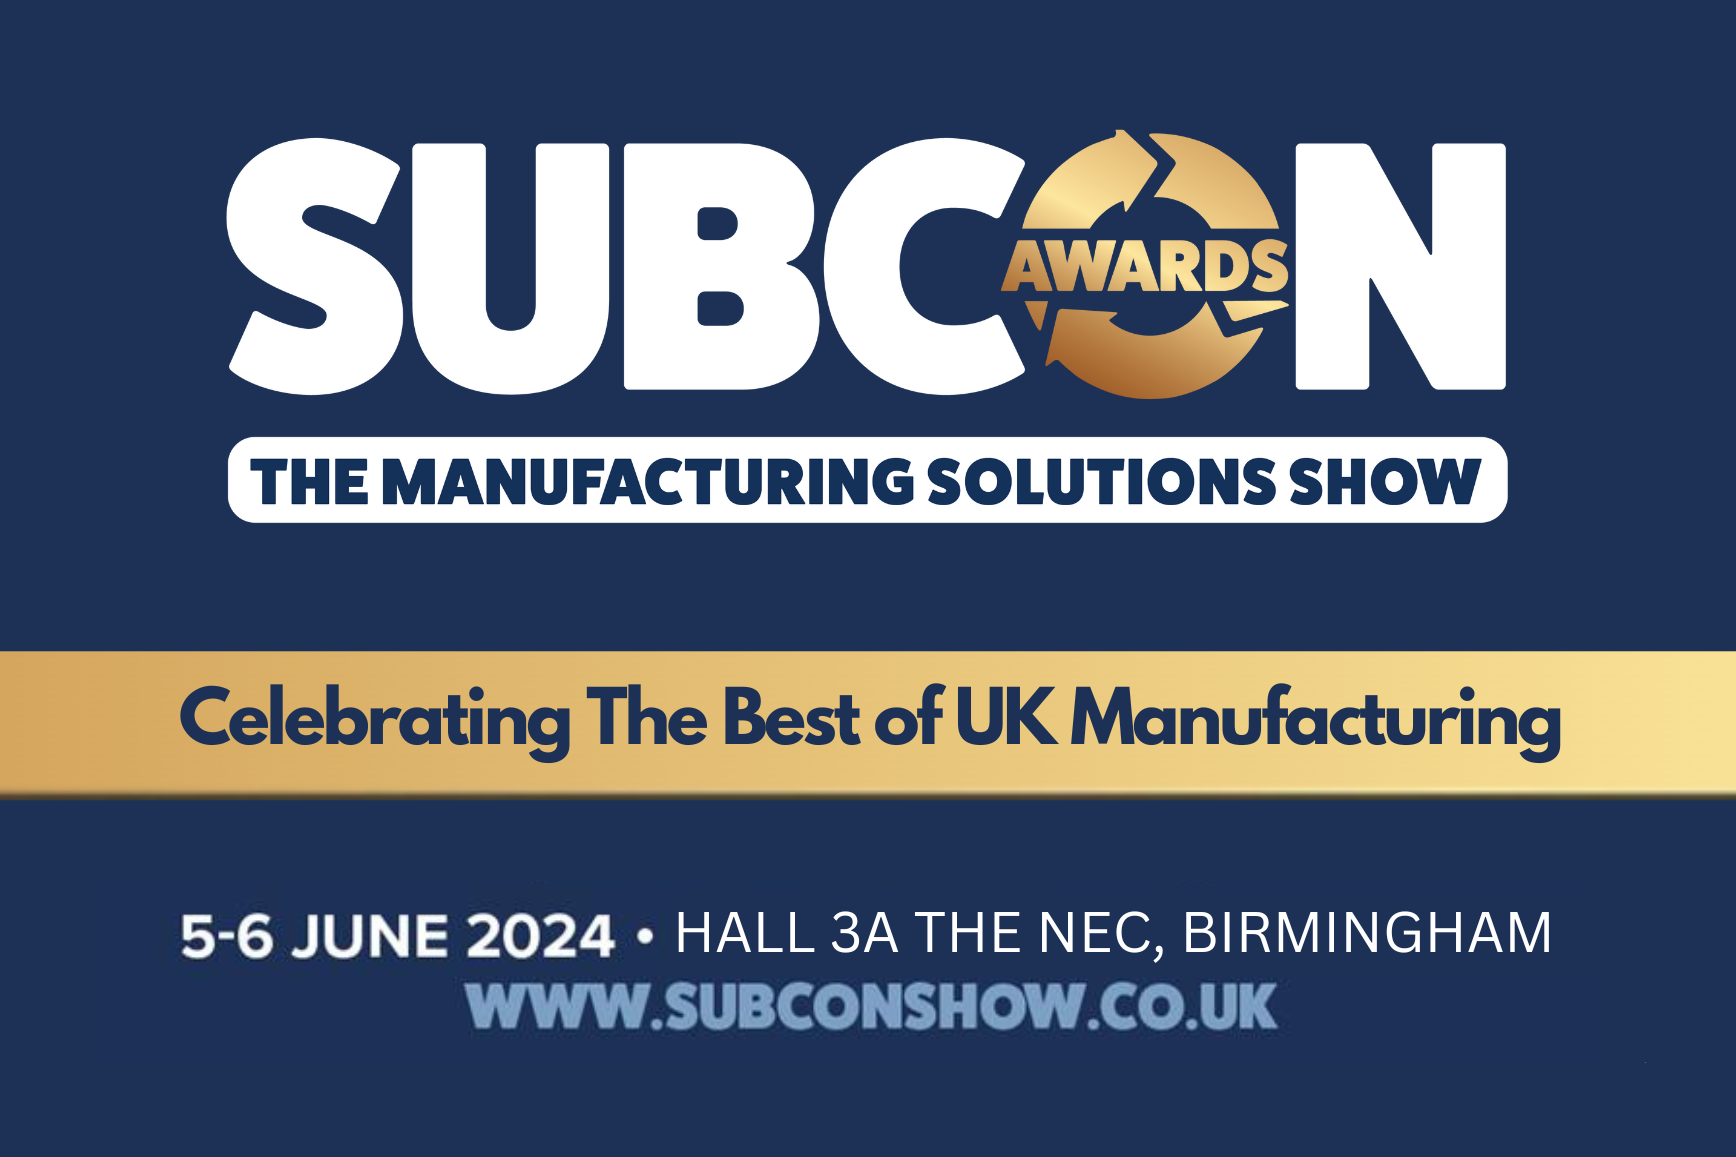 Celebrating the best of UK manufacturing and honouring outstanding engineering innovation